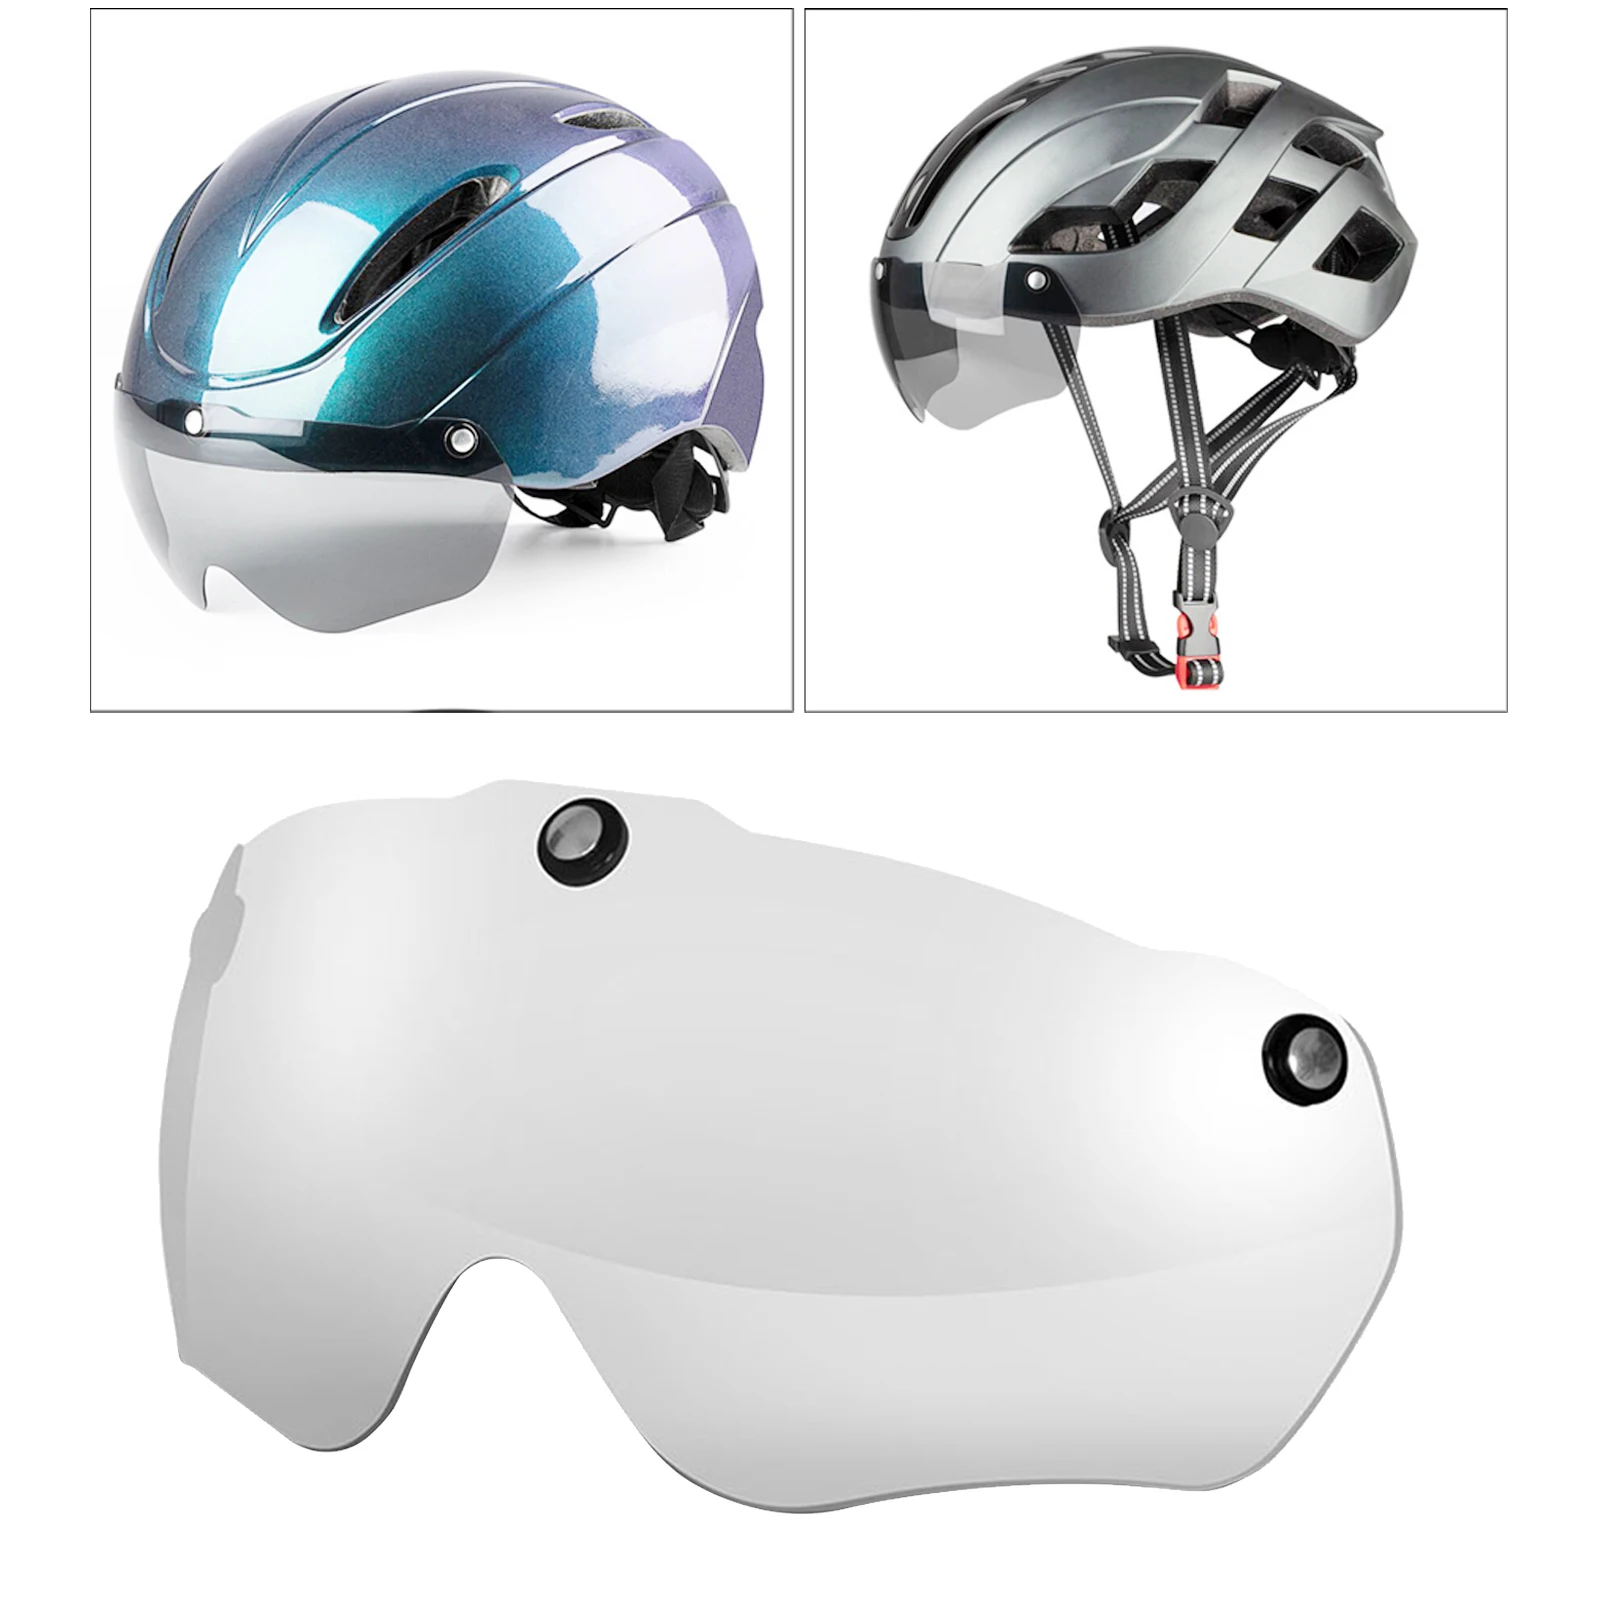 UV-Protect Goggles, Replacement Lens bicycleAnti-Impact Helmet Eye Shield Bicycle Triathlon Magnetic Visor Accessories